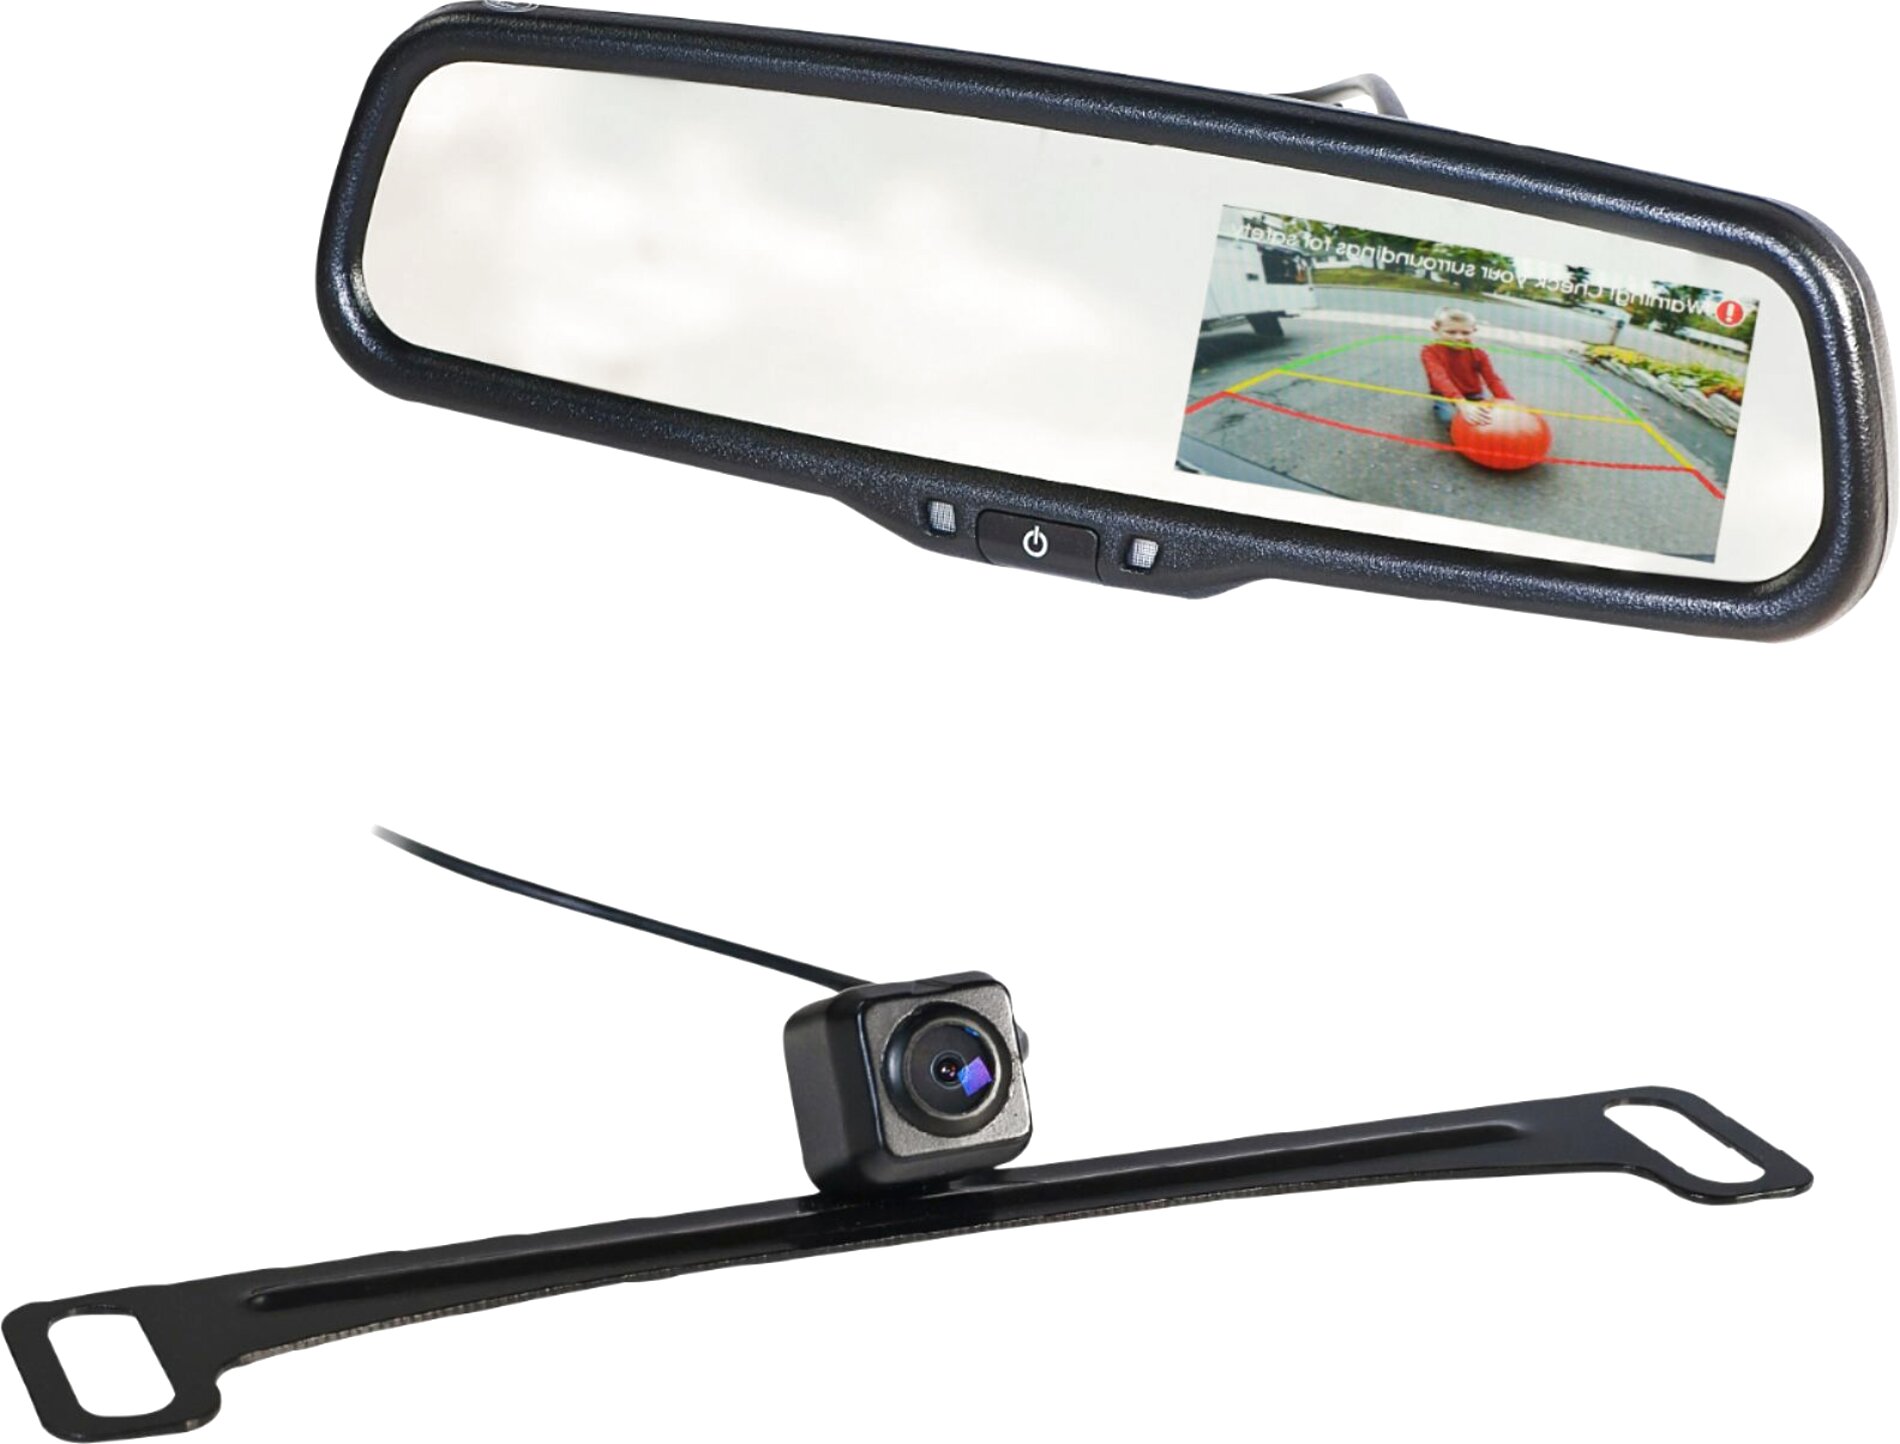 Rear View Mirror Camera for sale in UK  63 used Rear View Mirror Cameras